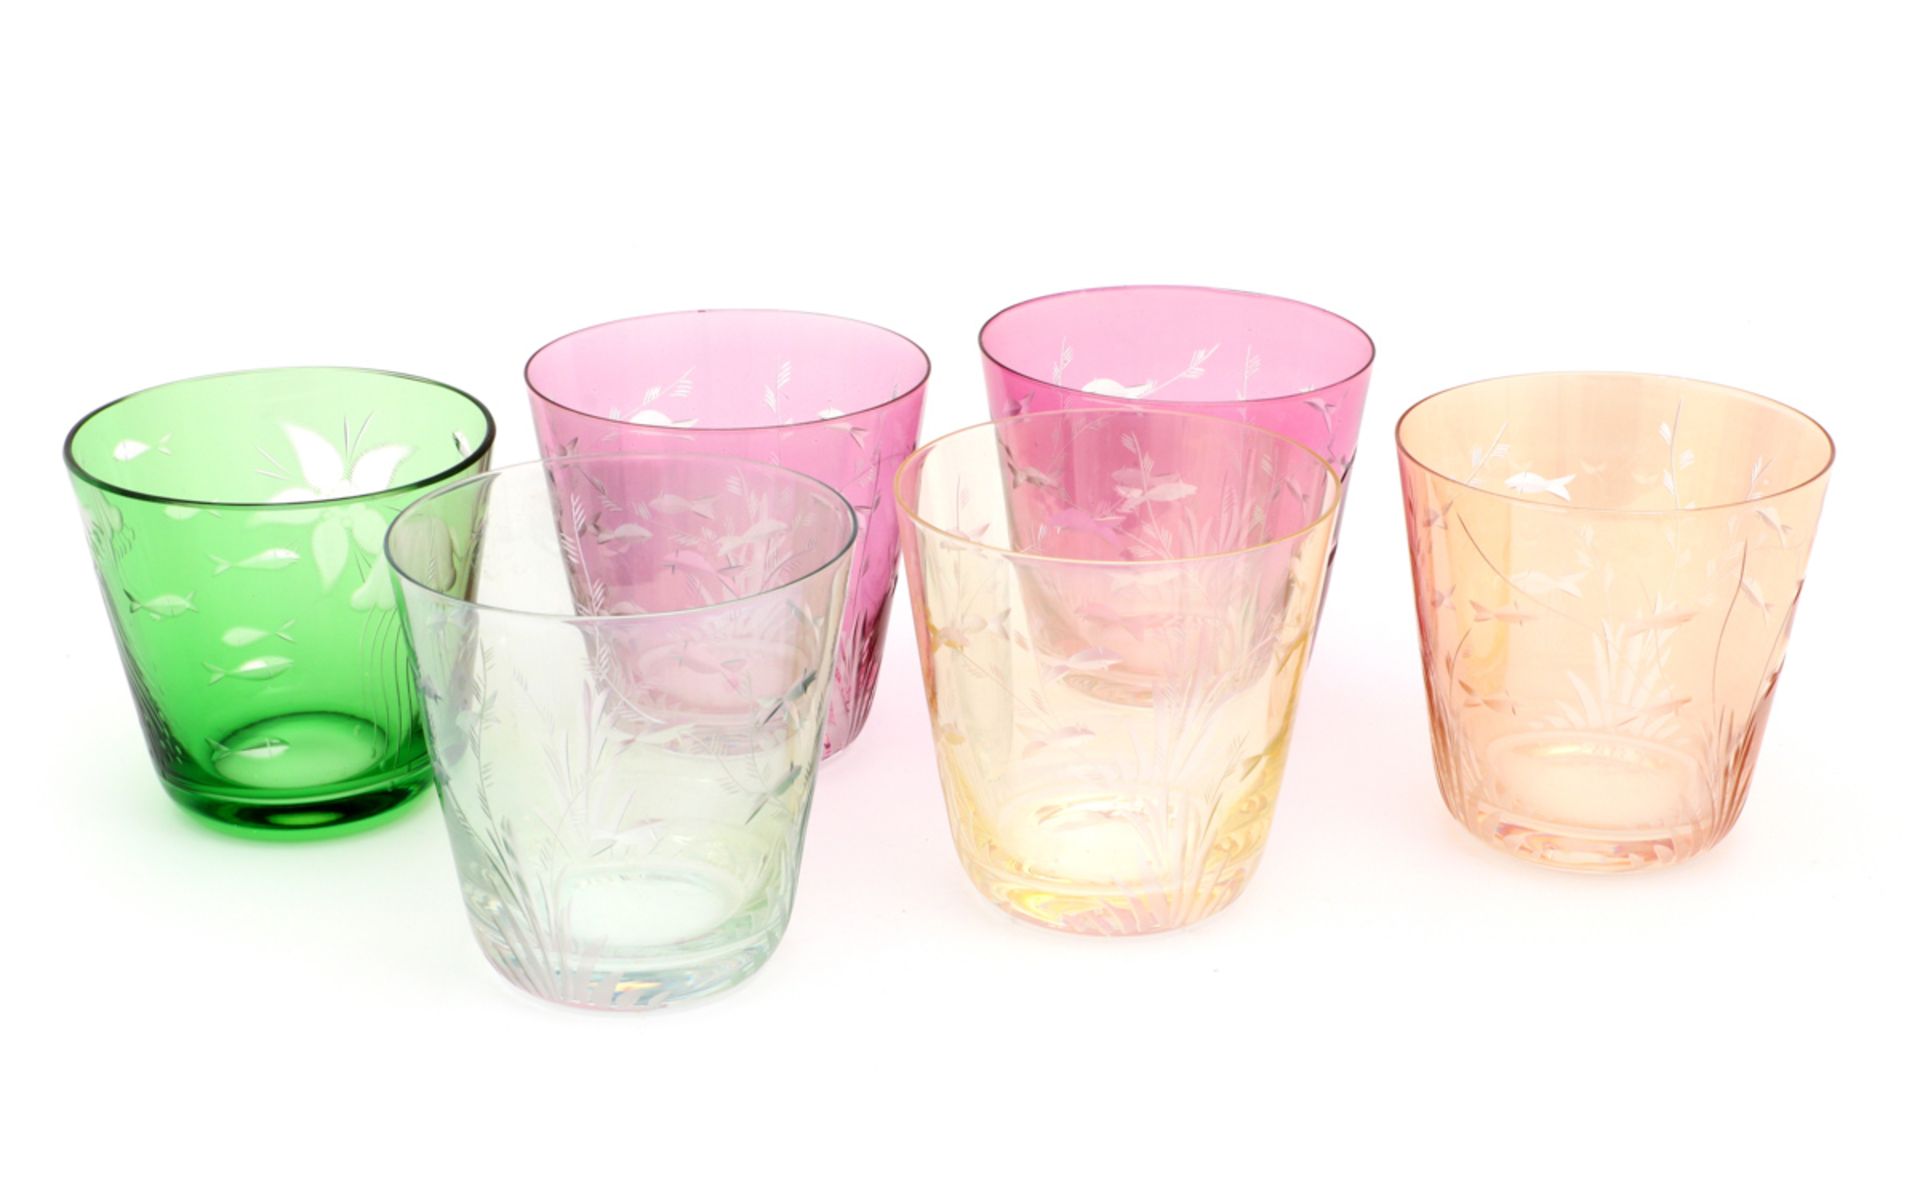 SIX GLASSES For water, colored glass, made by Carl Rotter (Lübeck), mid 20th Century, engraved